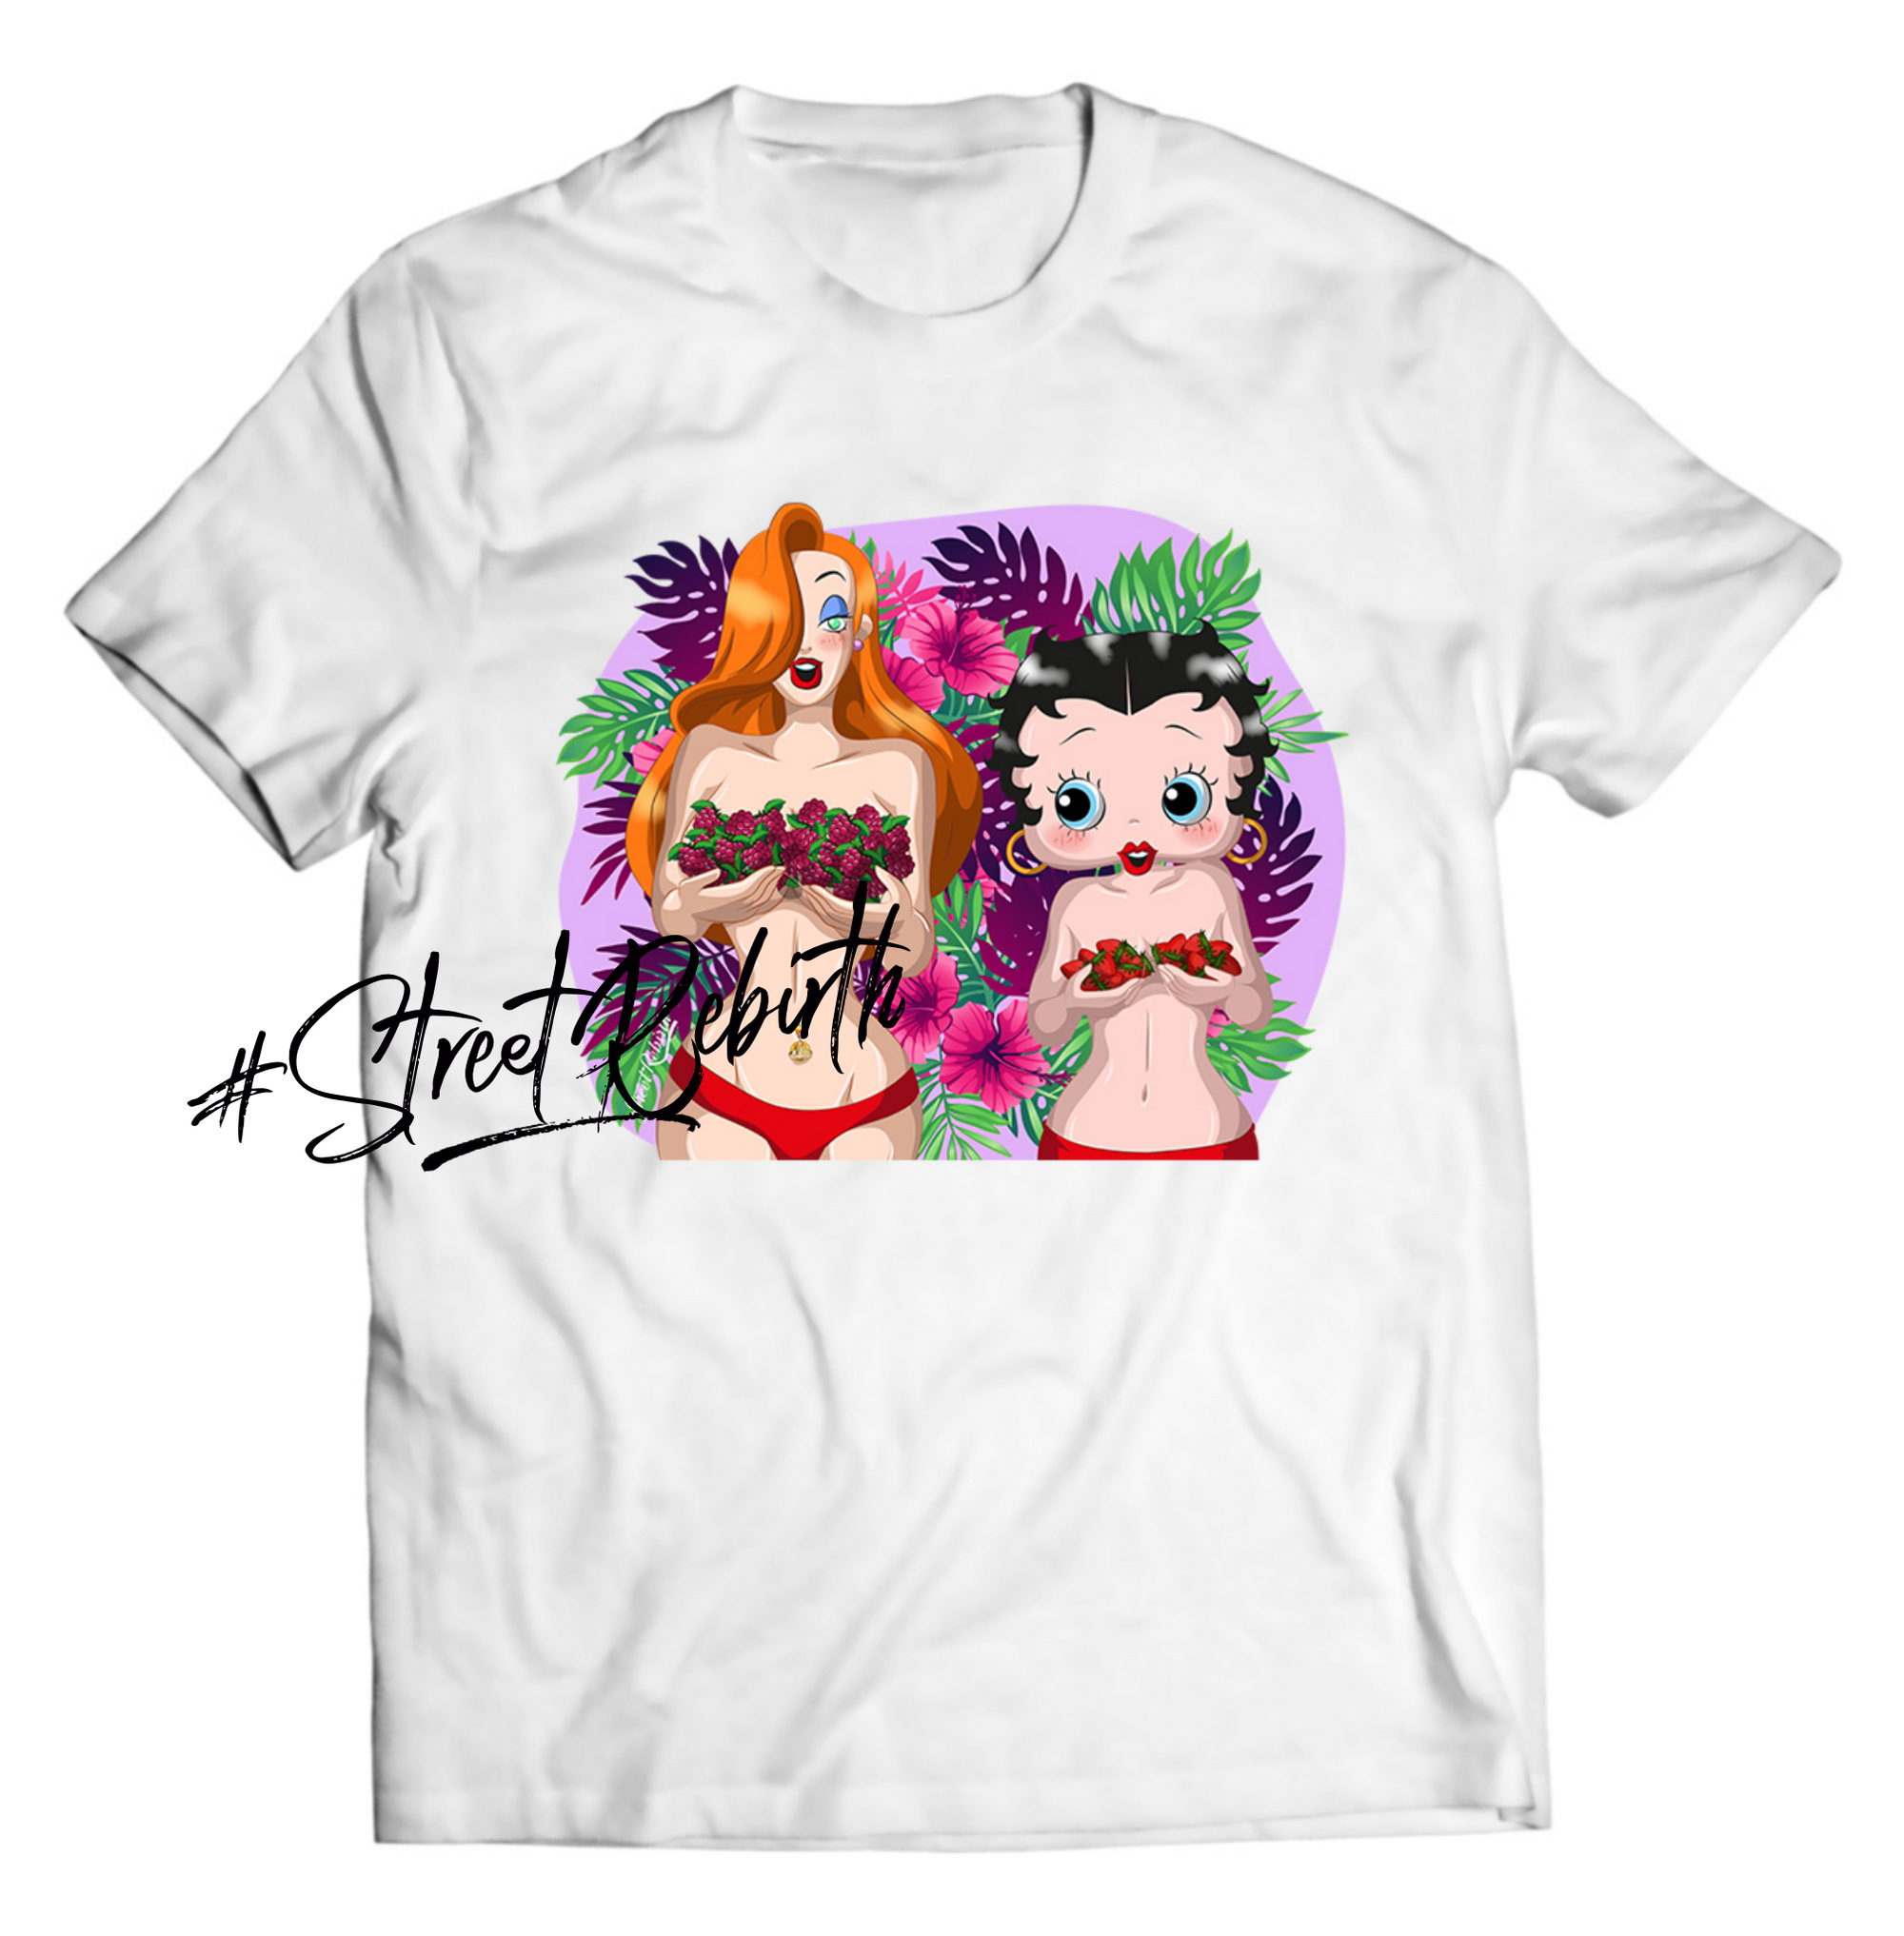 Betty and Jessica Rabbit Shirt - Direct To Garment Quality Print - Unisex Shirt - Gift For Him or Her